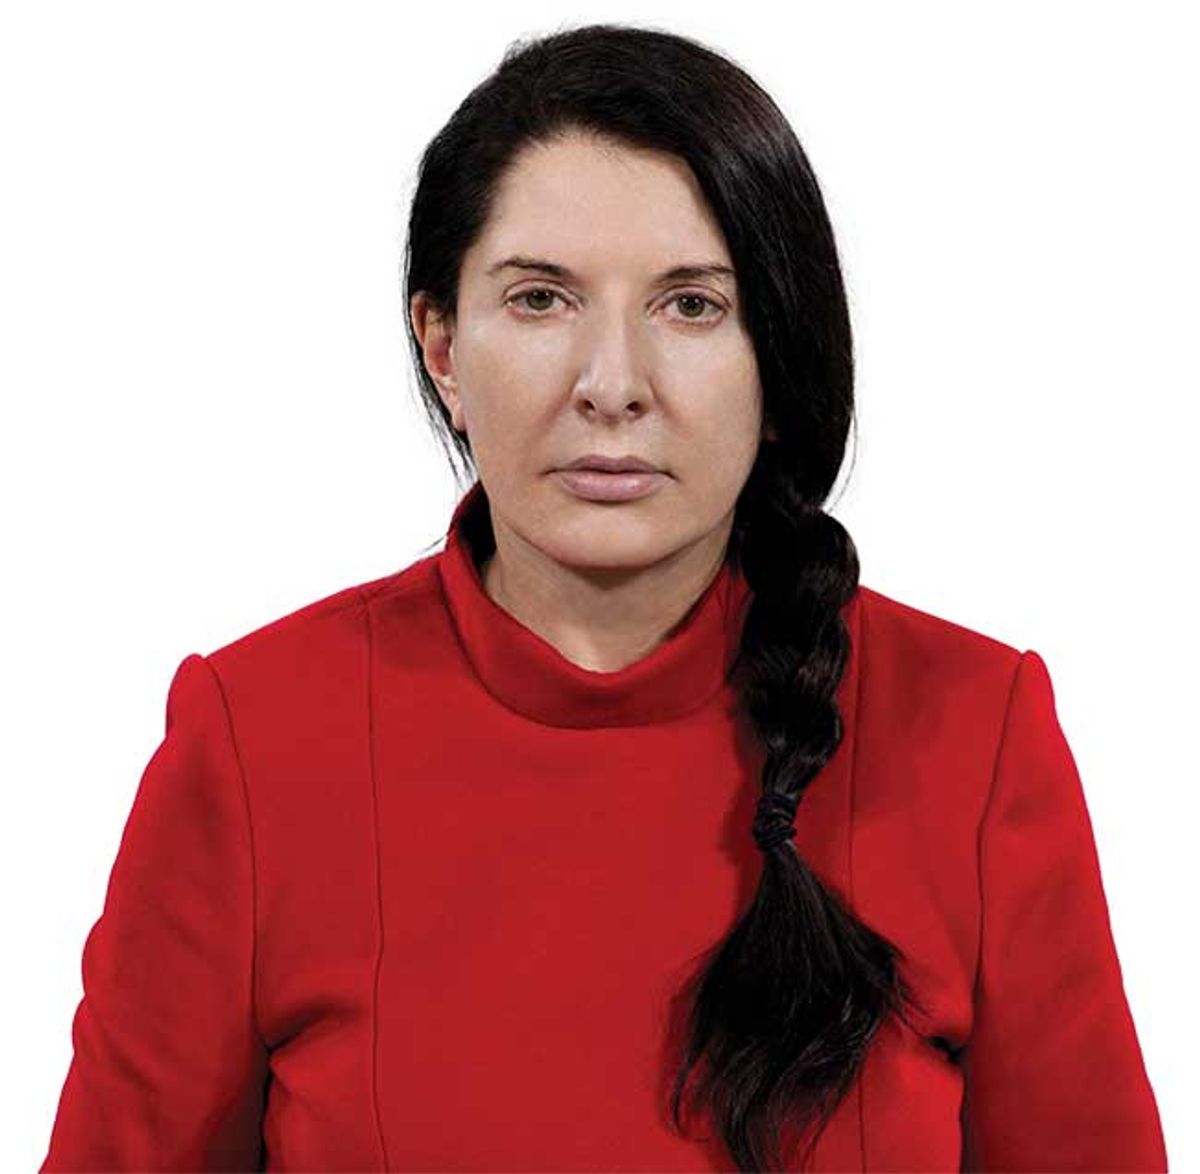 Marina Abramović pictured in 2010 performing her epic work The Artist is Present at the Museum of Modern Art in New York

Courtesy of Marina Abramovic Archives; © Marina Abramovic; Photo: Marco Anelli


